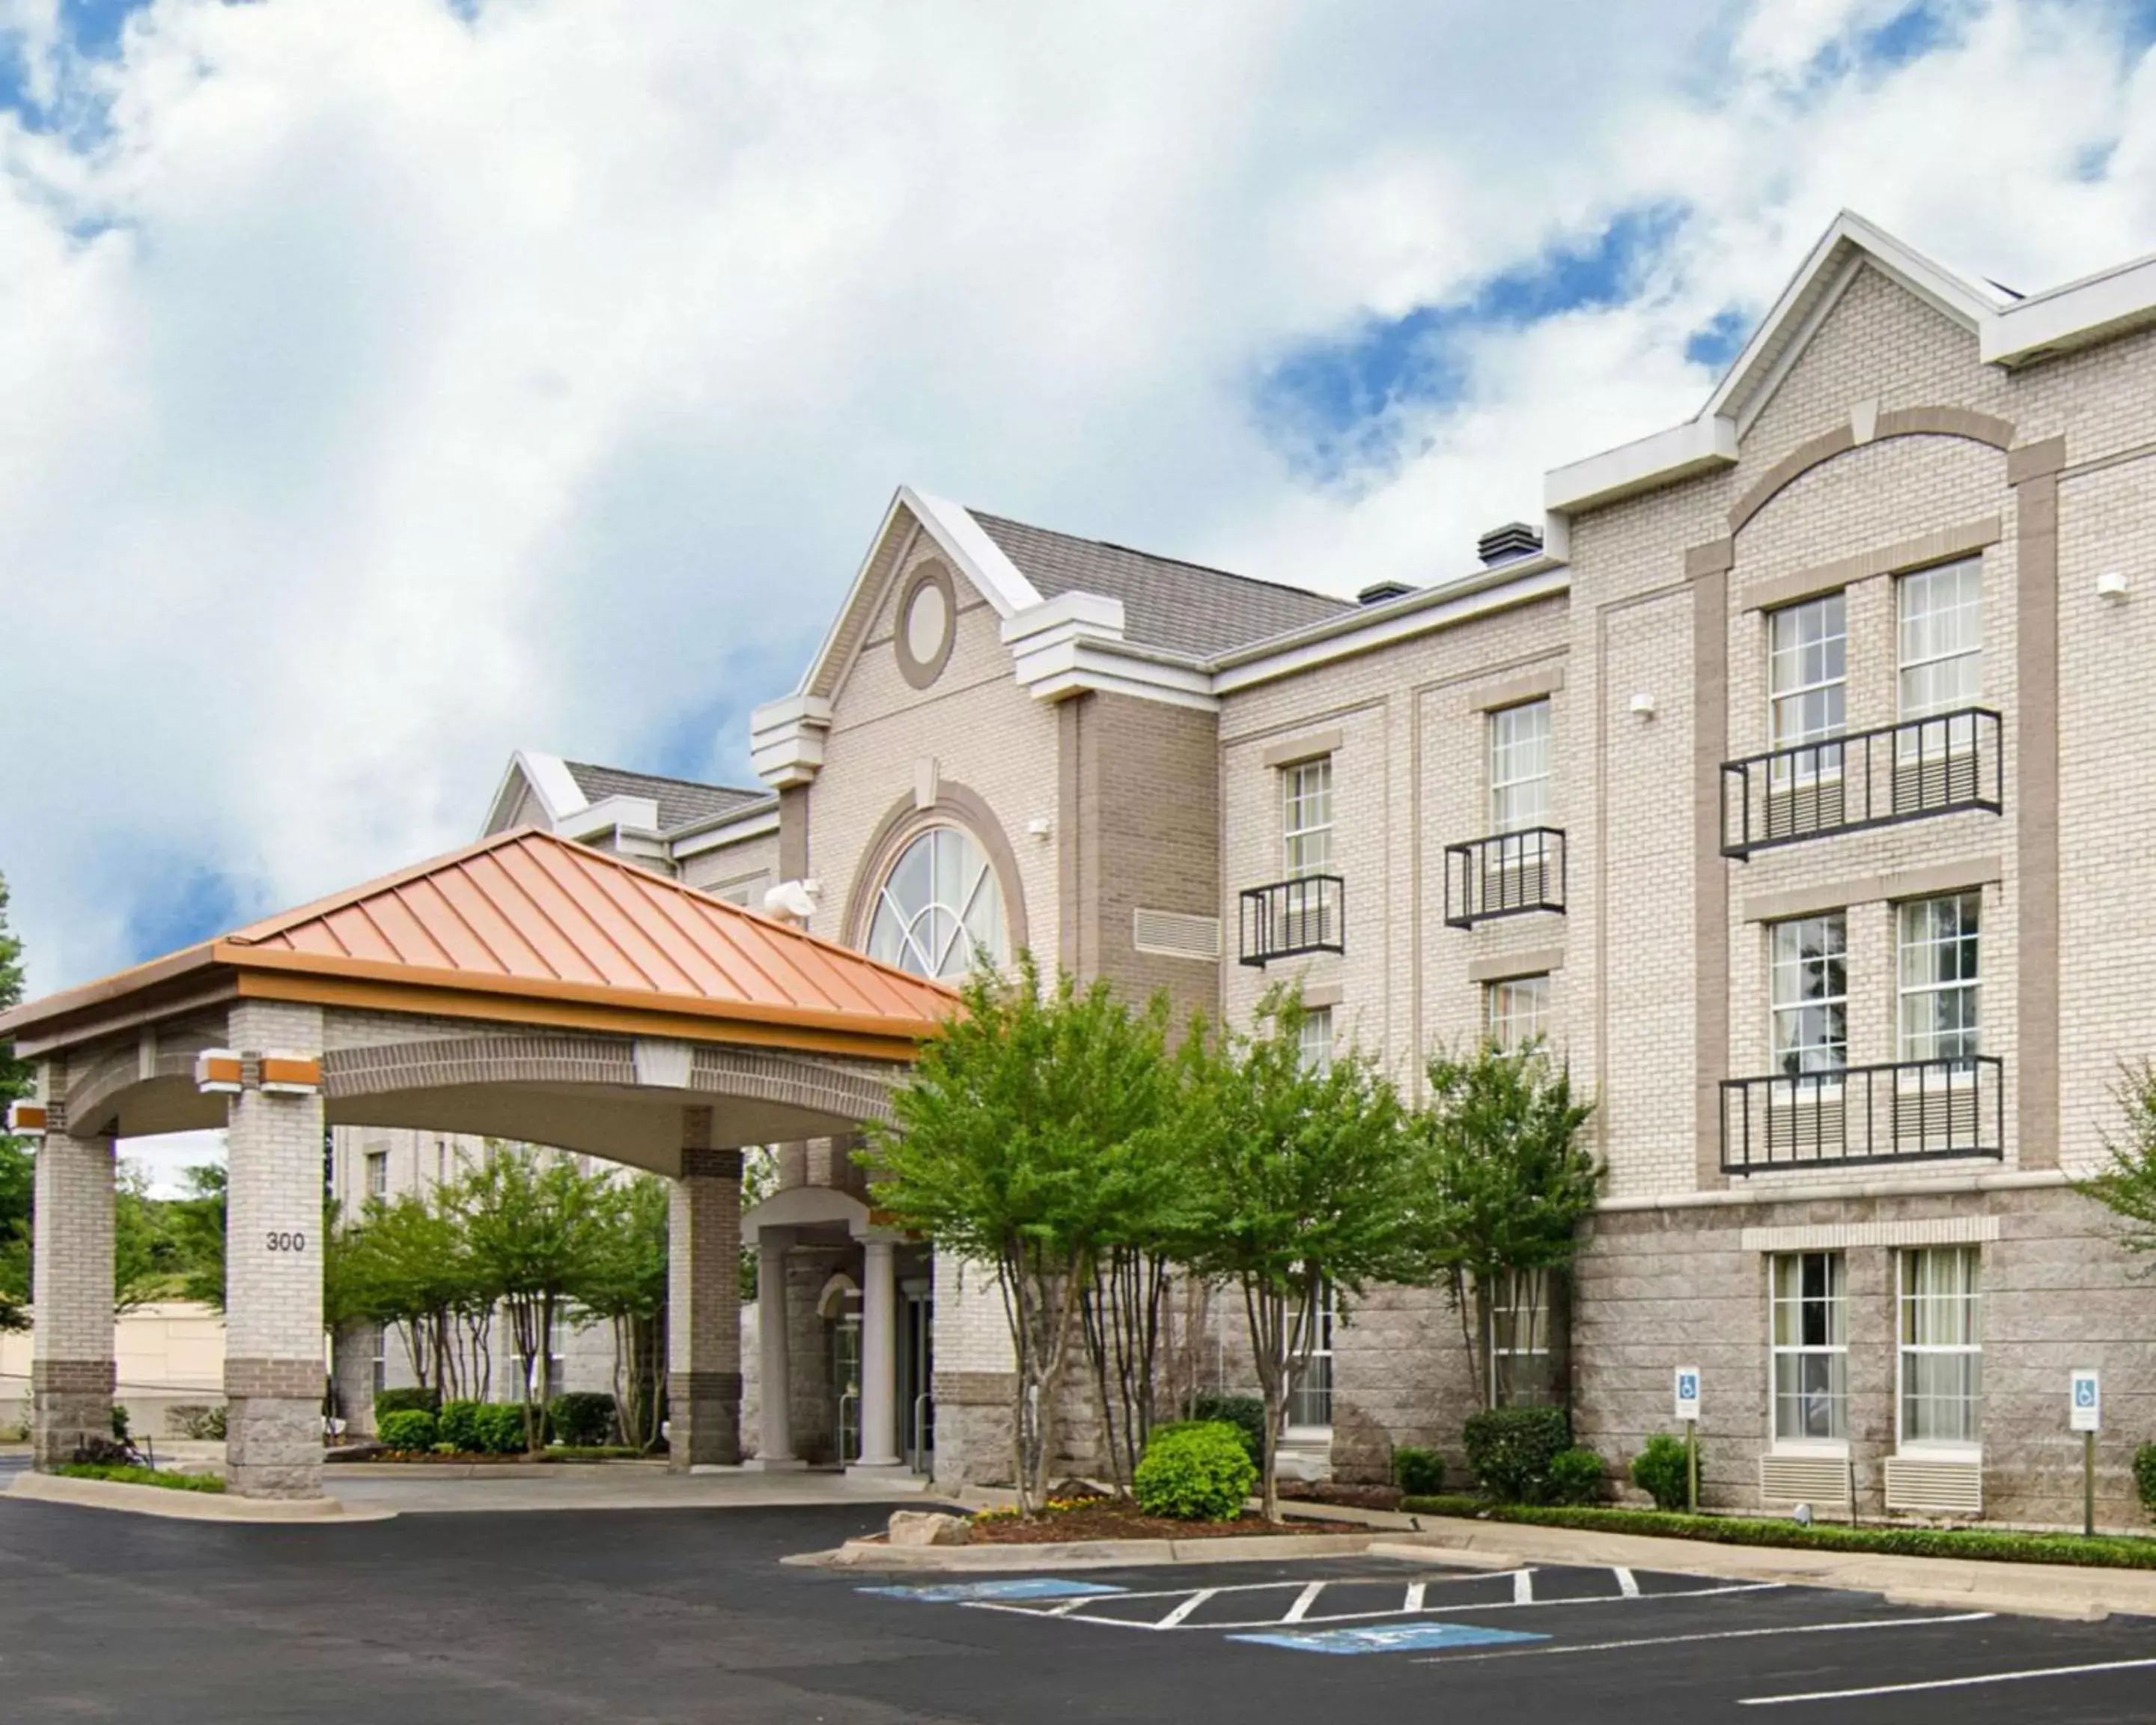 Property building in Quality Inn & Suites Little Rock West